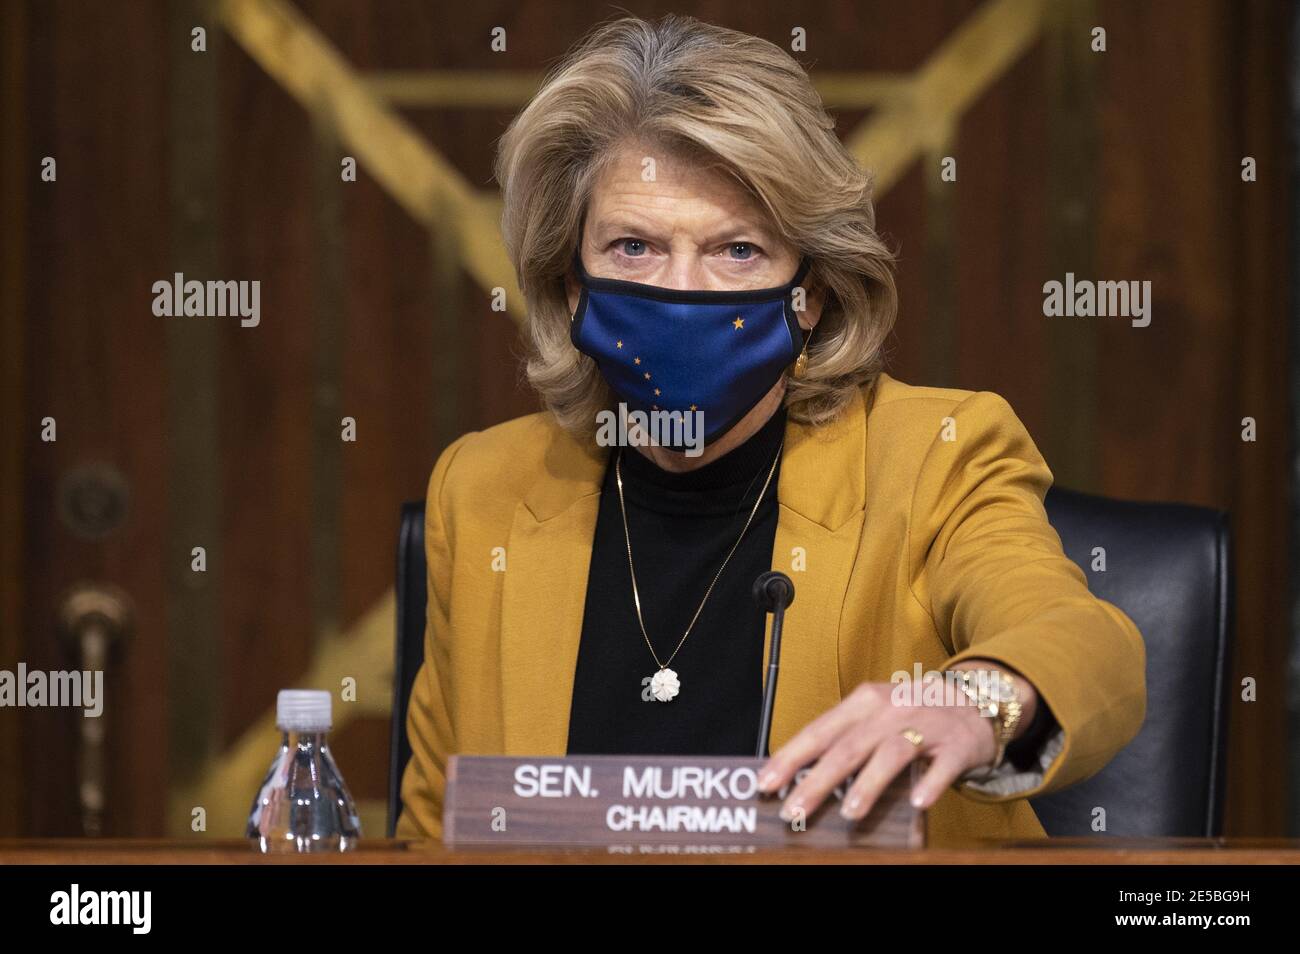 Washington, United States. 27th Jan, 2021. Chairwoman Lisa Murkowski, R-Alaksa, arrives for a hearing to examine the nomination of Former Michigan Governor Jennifer Granholm to be Secretary of Energy, on Capitol Hill in Washington, DC, on January 27, 2021. Photo by Jim Watson/UPI Credit: UPI/Alamy Live News Stock Photo